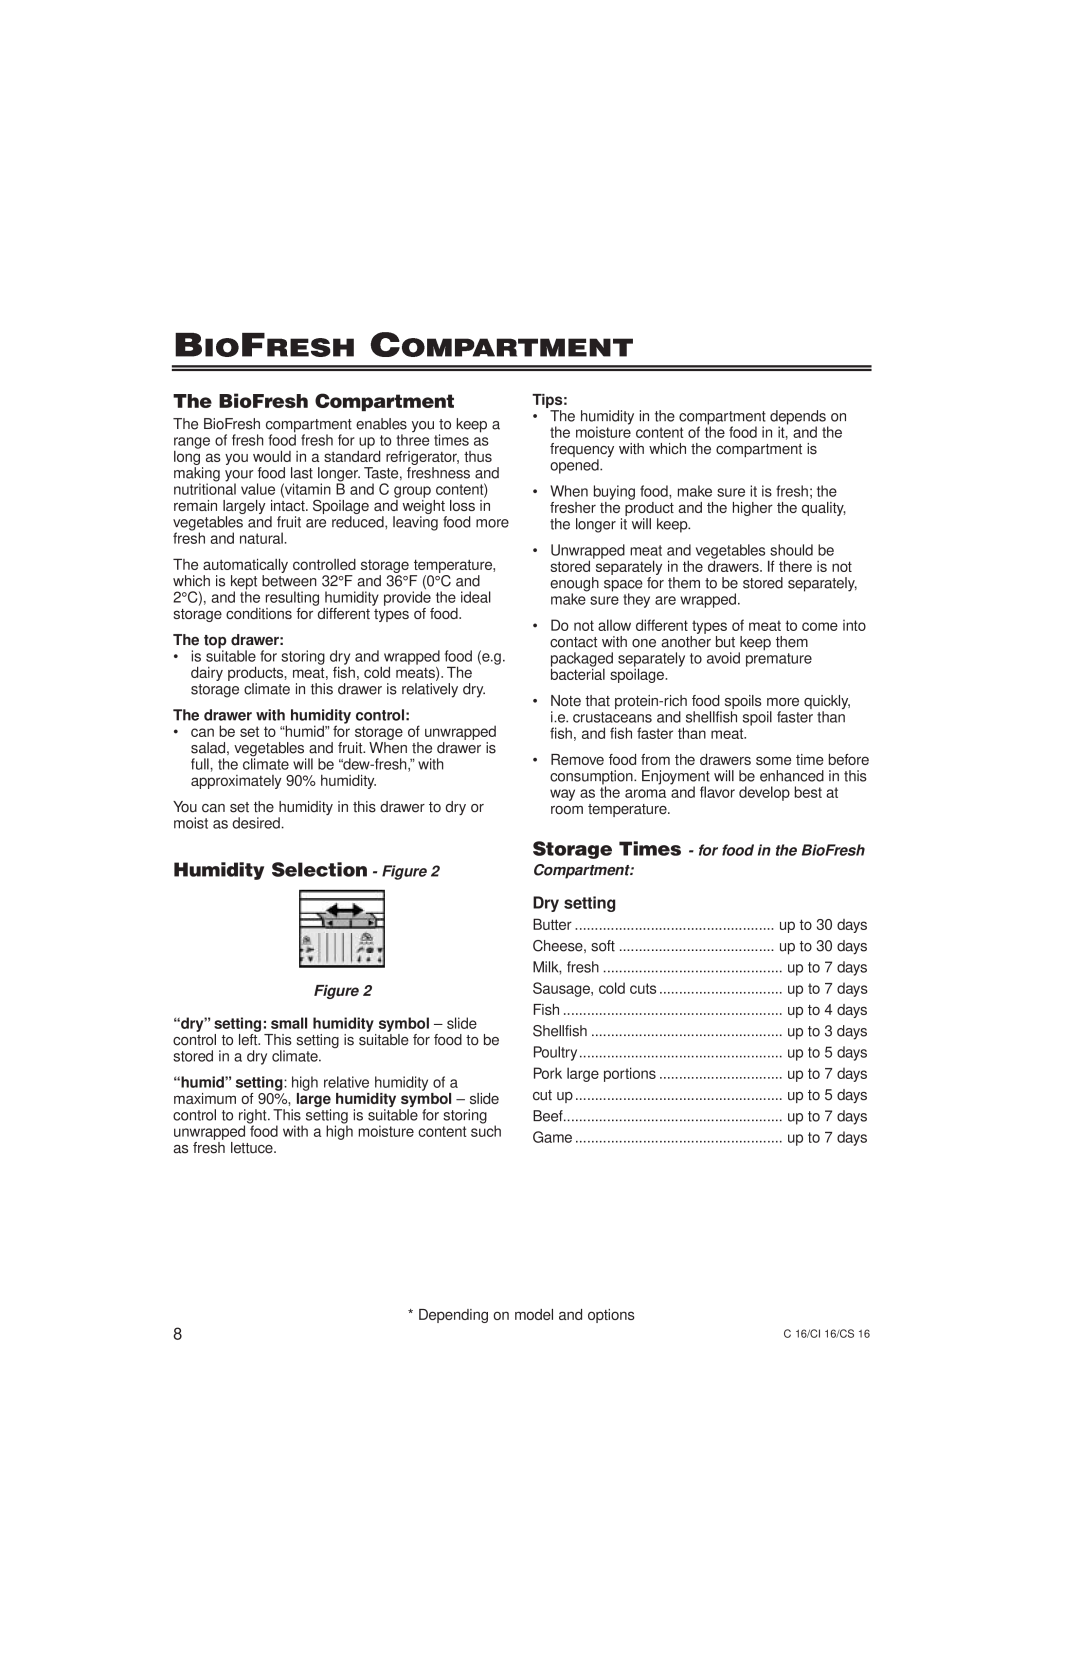 Liebherr 7082, 2956 Biofresh Compartment, The BioFresh Compartment, Humidity Selection - Figure, Dry setting 